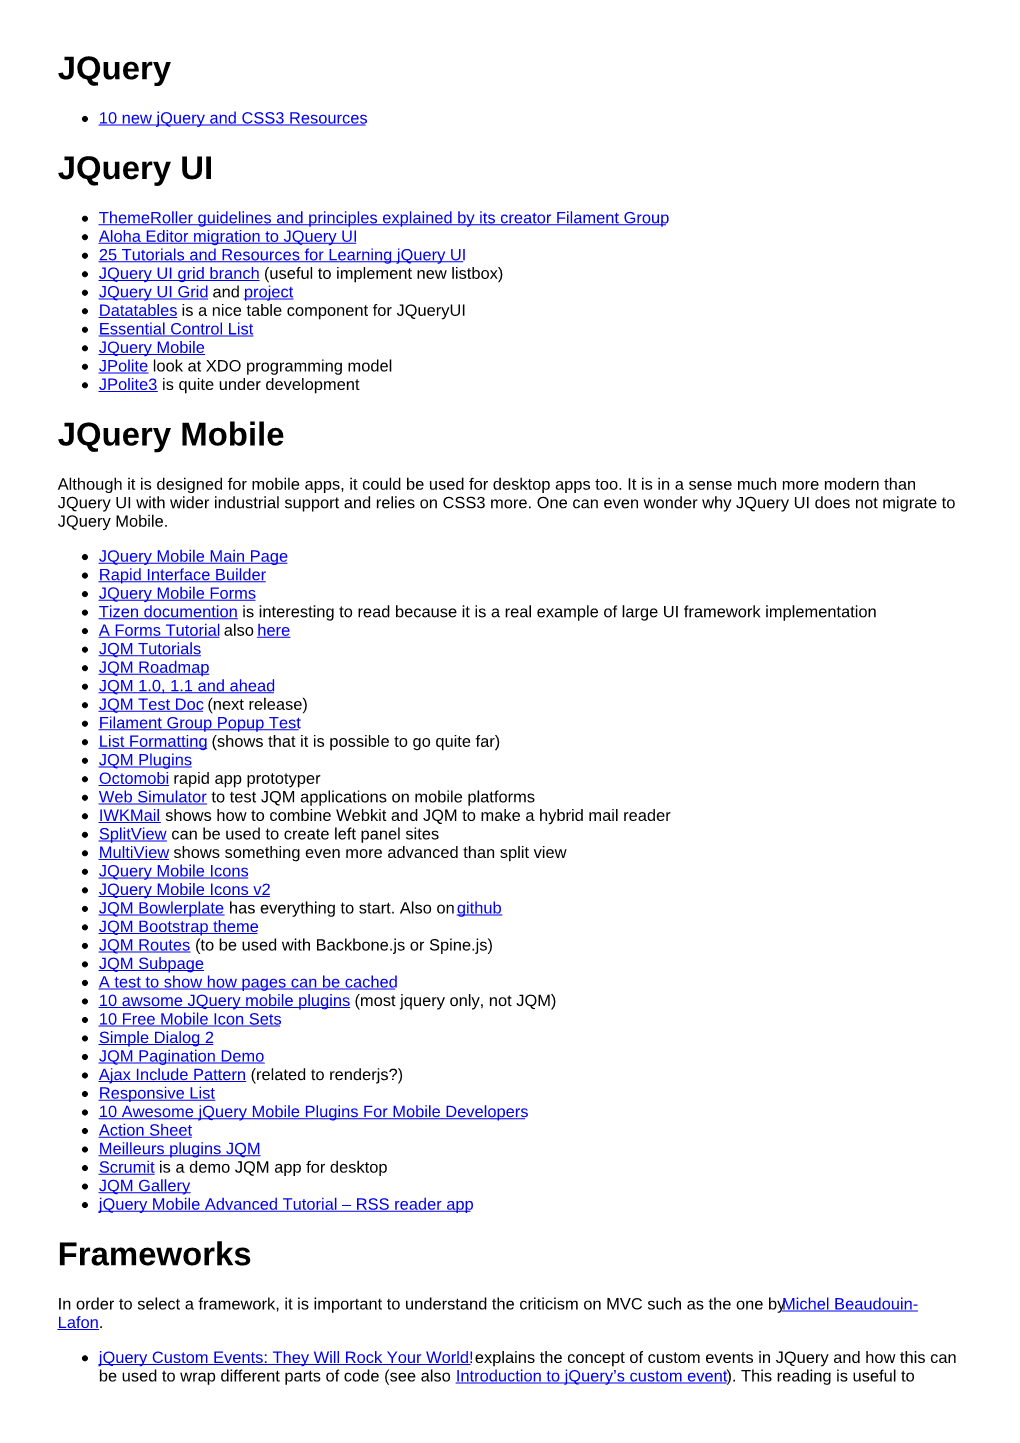 Jquery Mobile Jpolite Look at XDO Programming Model Jpolite3 Is Quite Under Development Jquery Mobile